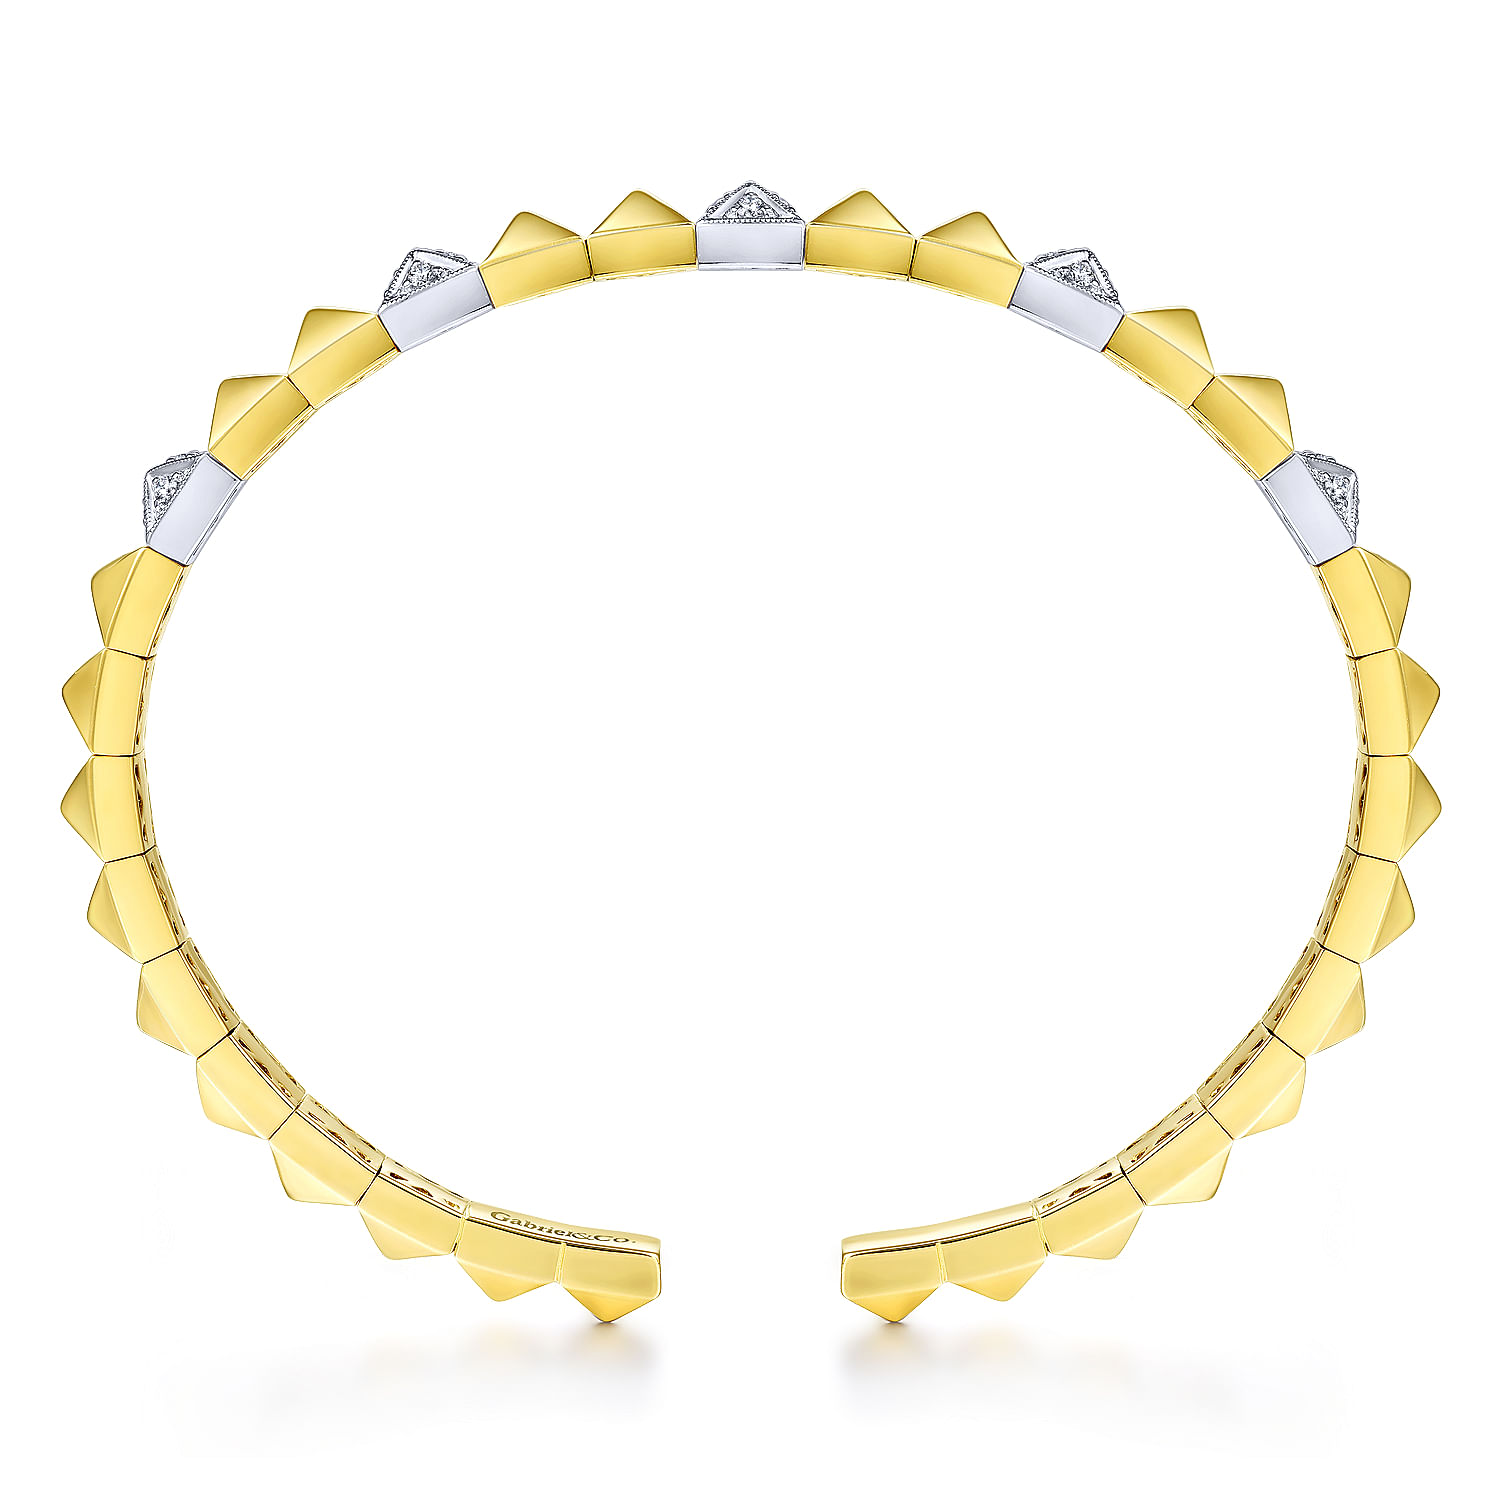 14K Yellow and White Gold Pyramid Bangle with Pavé Diamond Stations